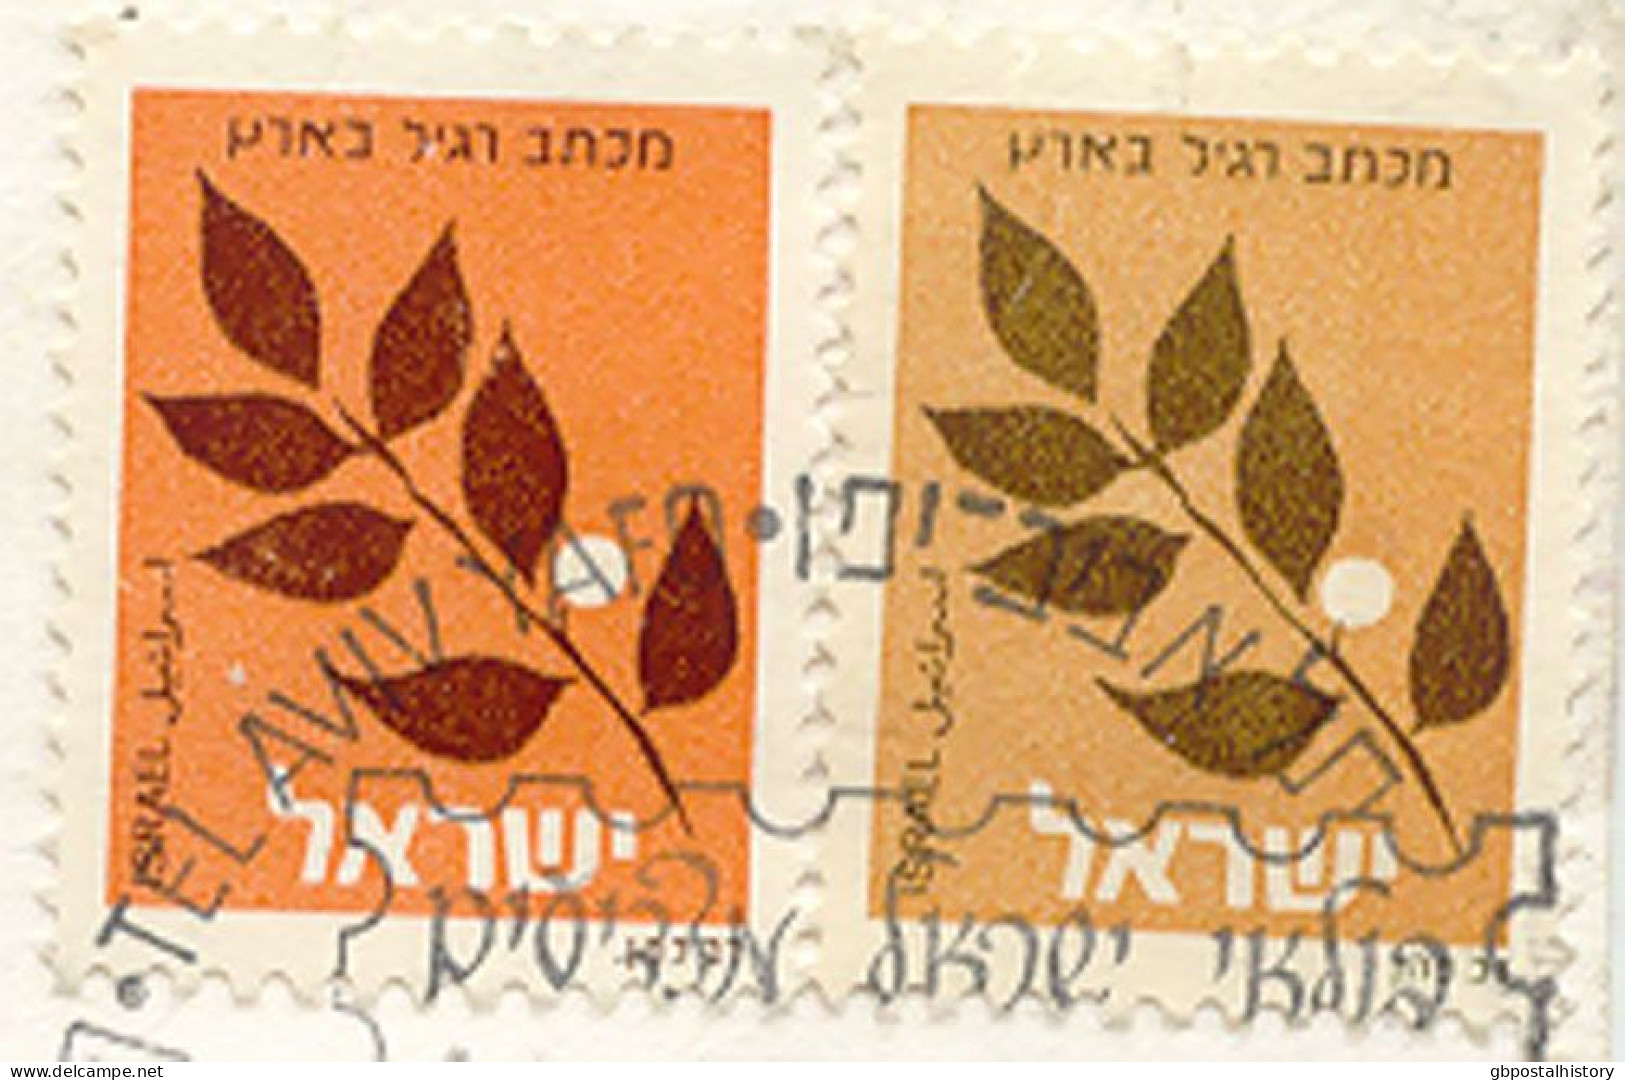 ISRAEL 1986 Branch Without Valuation 2 Times On Very Fine Cover With SST "AMERIPEX '86 22.5.1986", MAJOR ERROR & VARIETY - Brieven En Documenten